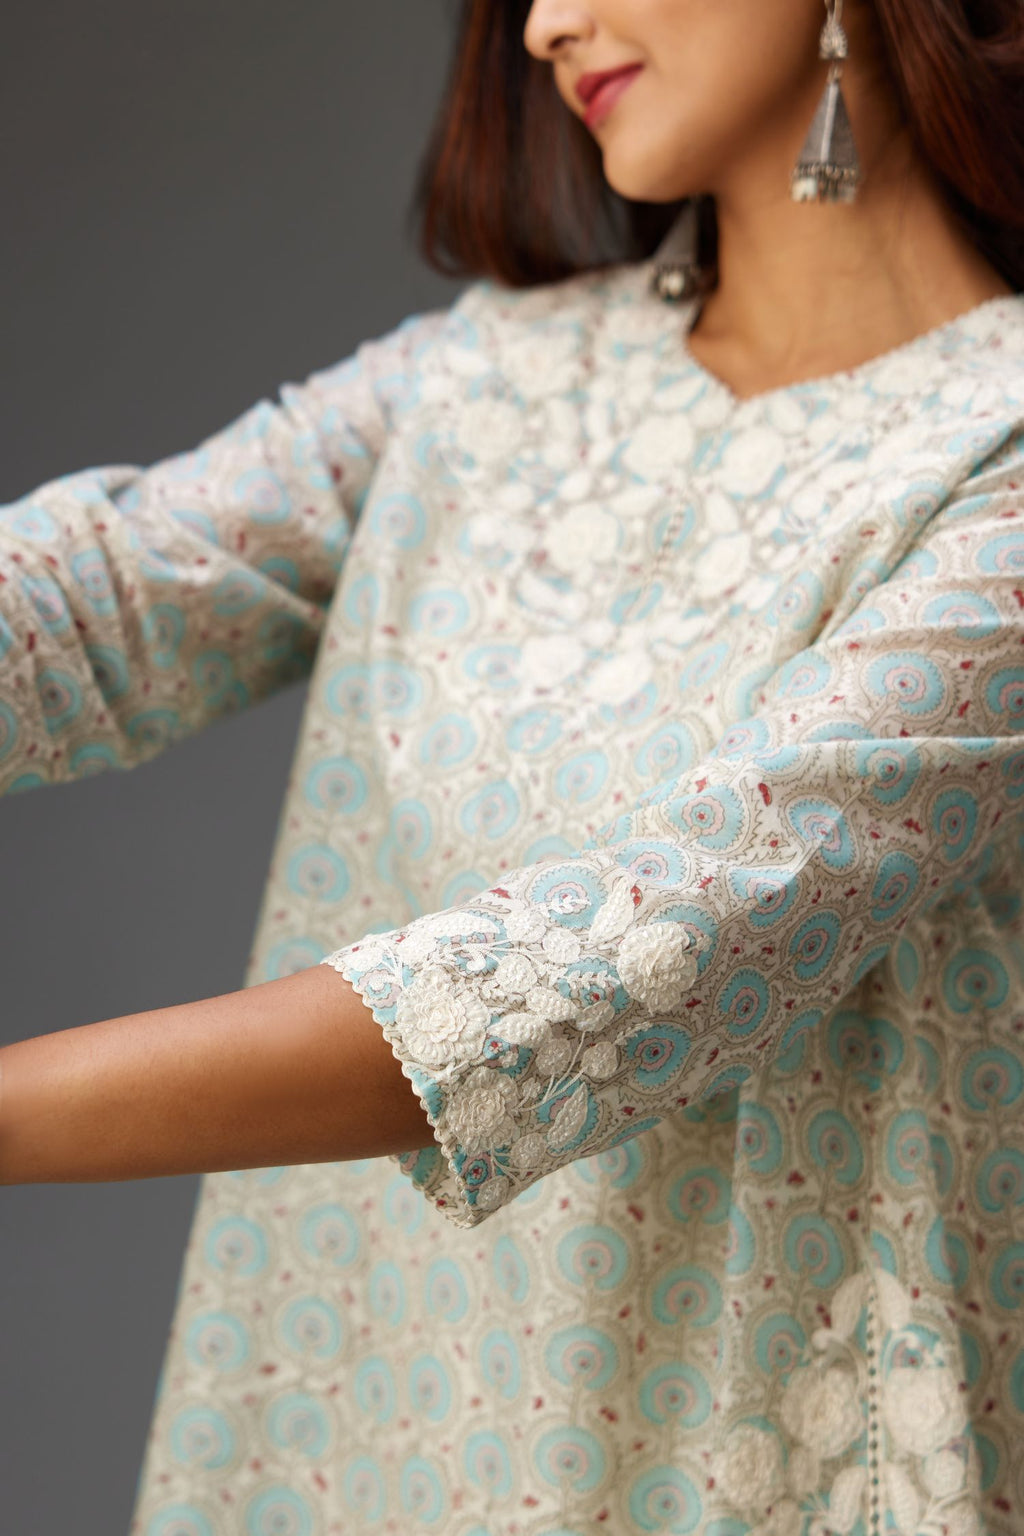 Blue & grey hand block printed short A-line kurta set with appliqué embroidery, highlighted with ric rac lace and sequins.